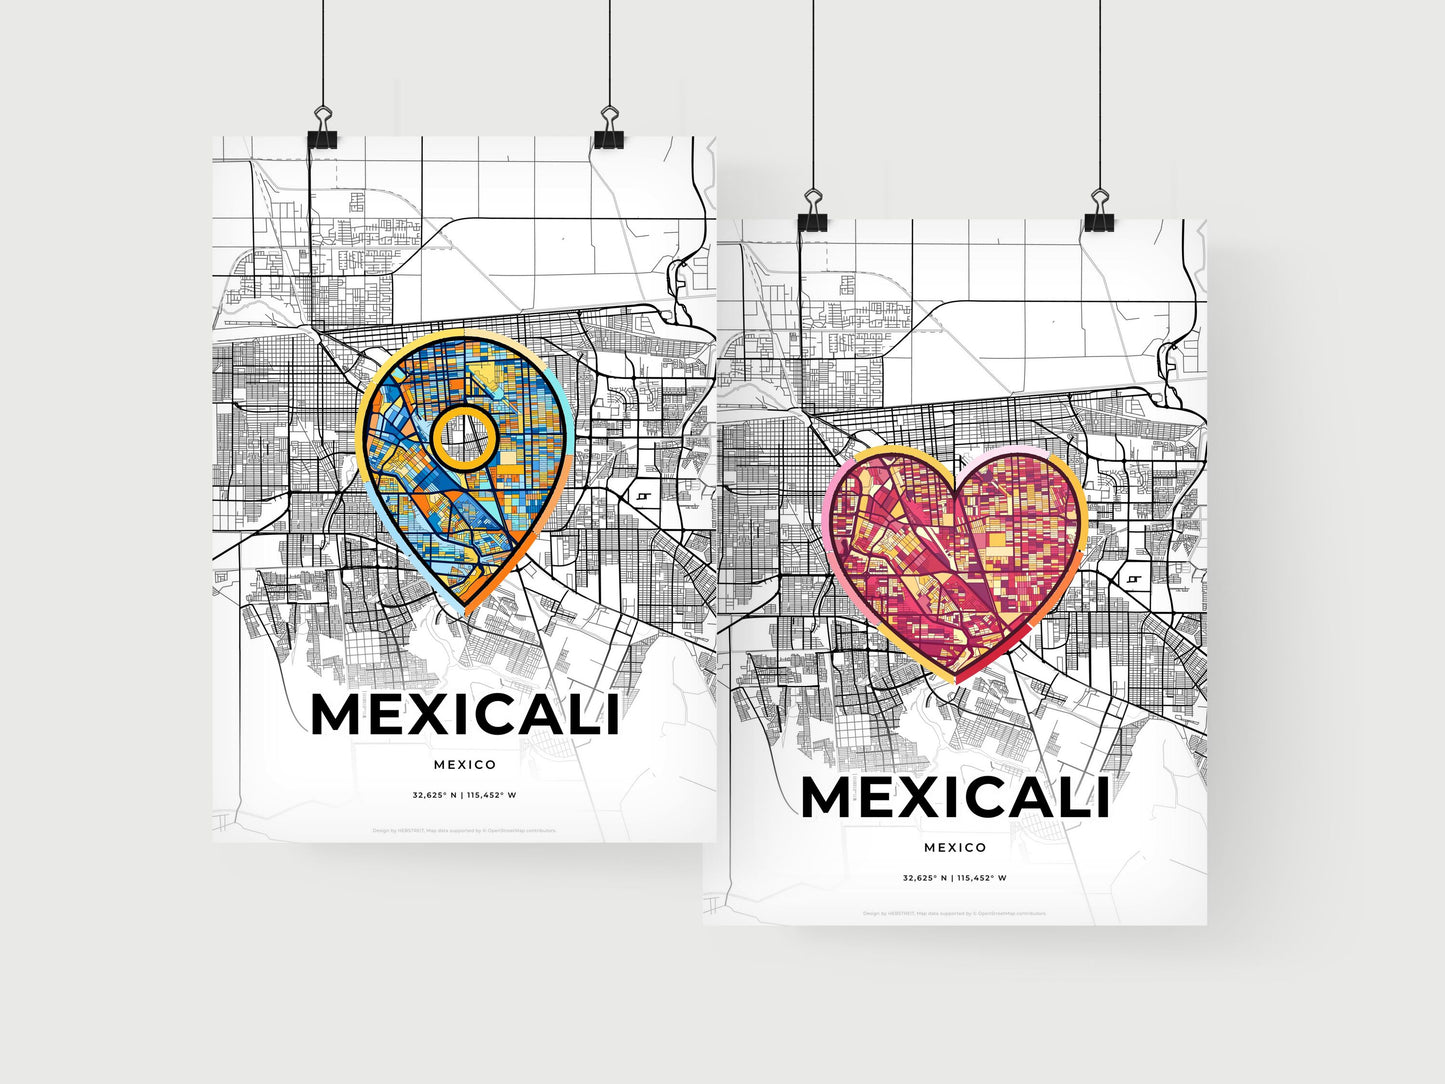 MEXICALI MEXICO minimal art map with a colorful icon.